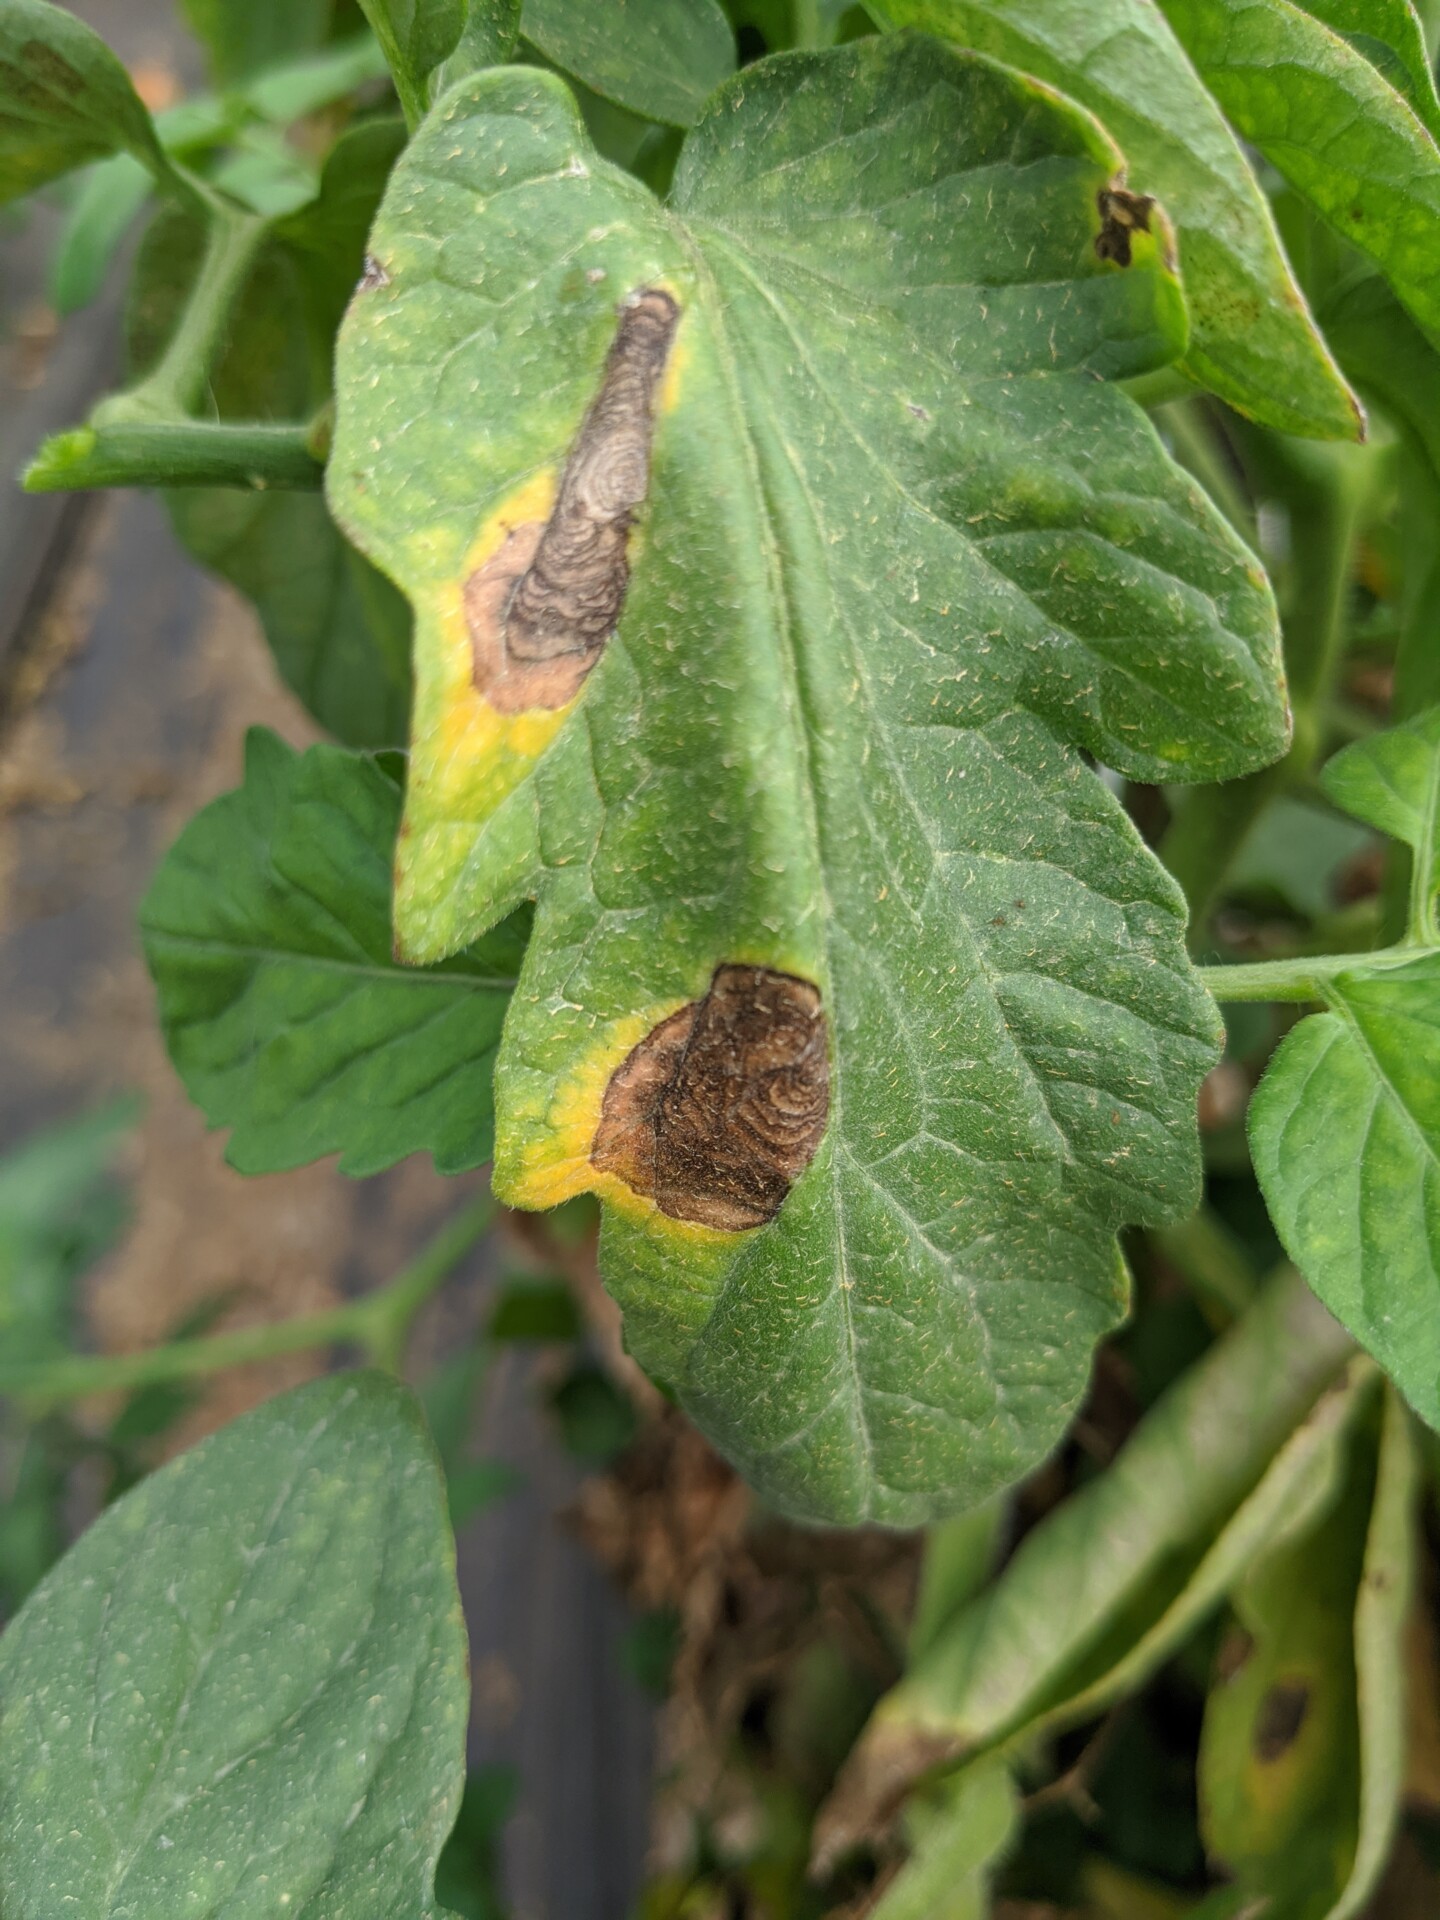 Early blight lesion on tomato.